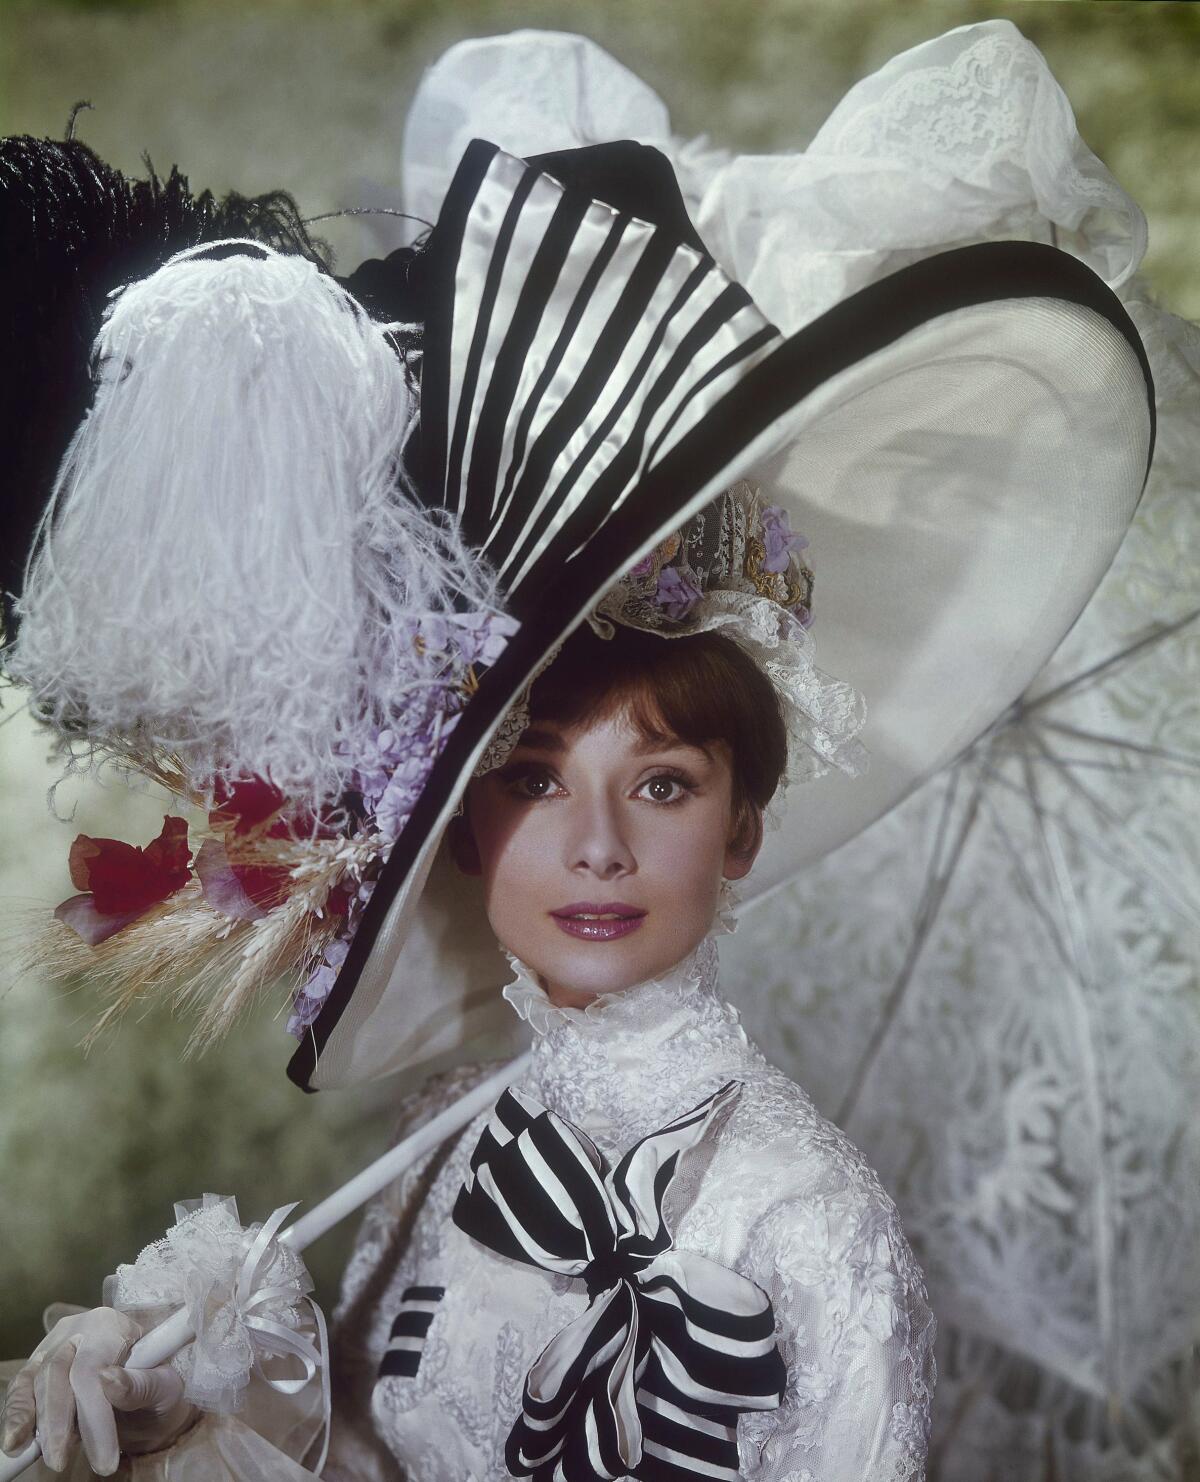 A woman in an 1890s black-and-white dress with a large hat and a lacy parasol.